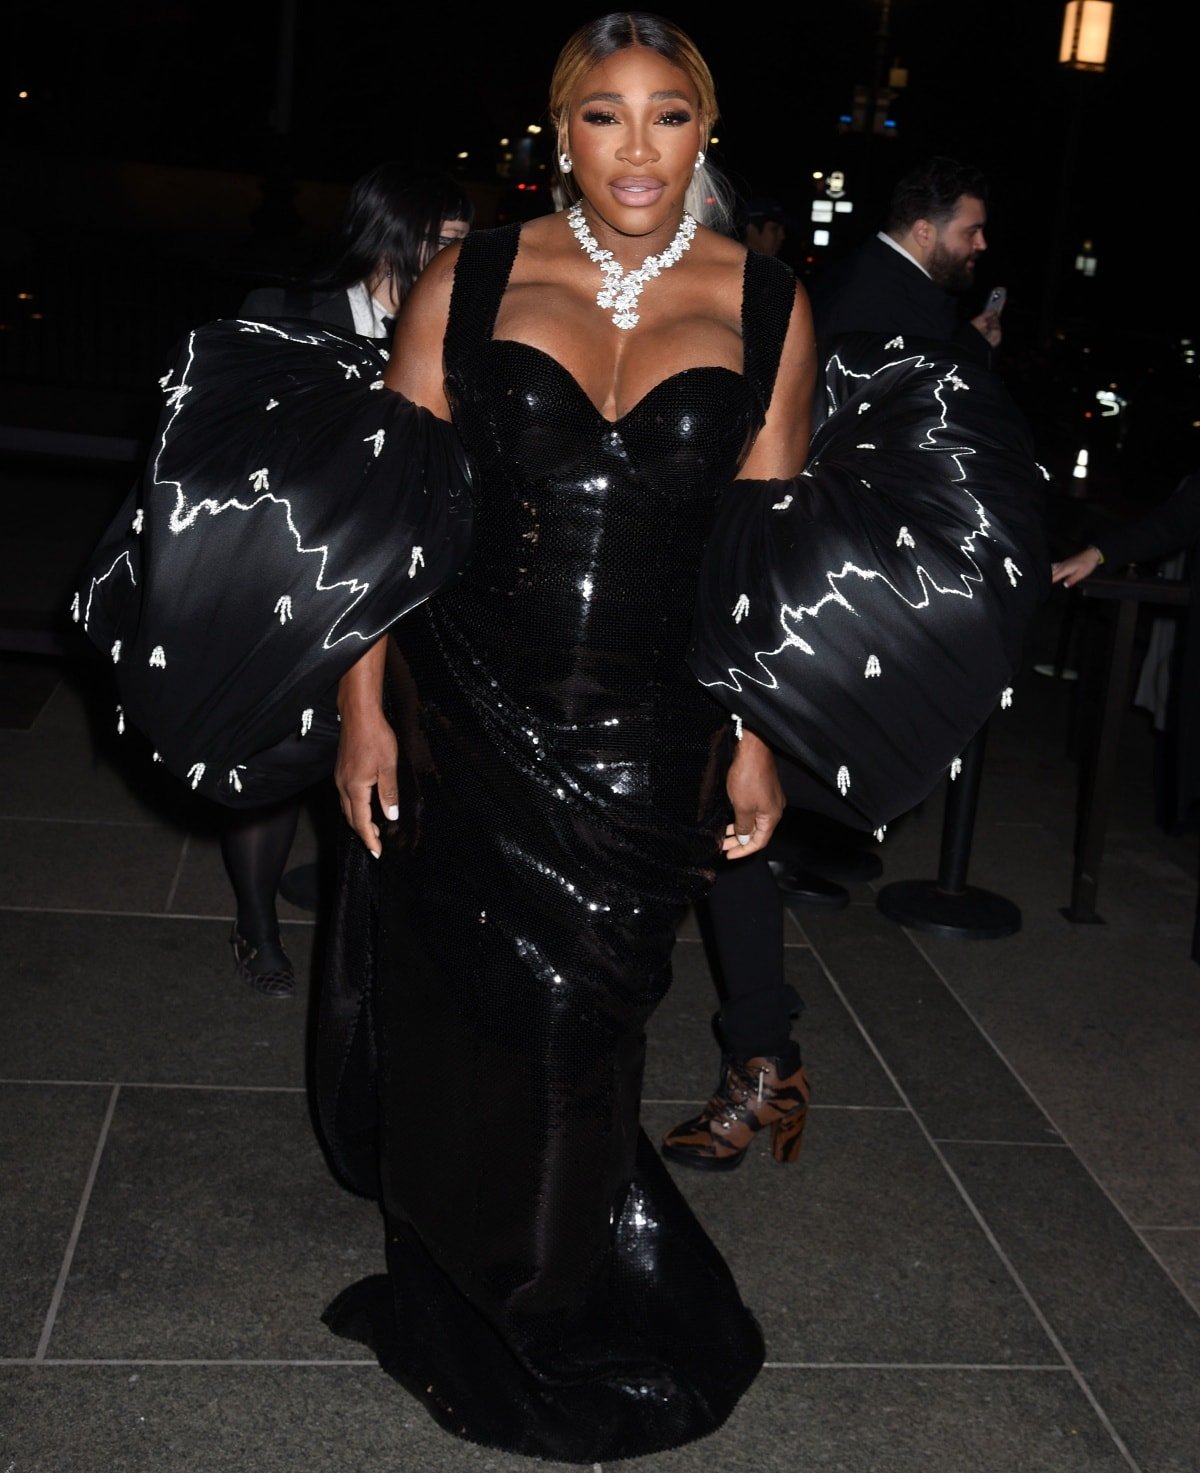 Serena Williams wearing a custom look from Thom Browne featuring statement-making puff sleeves, sequin and crystal embellishments, and a dramatic train